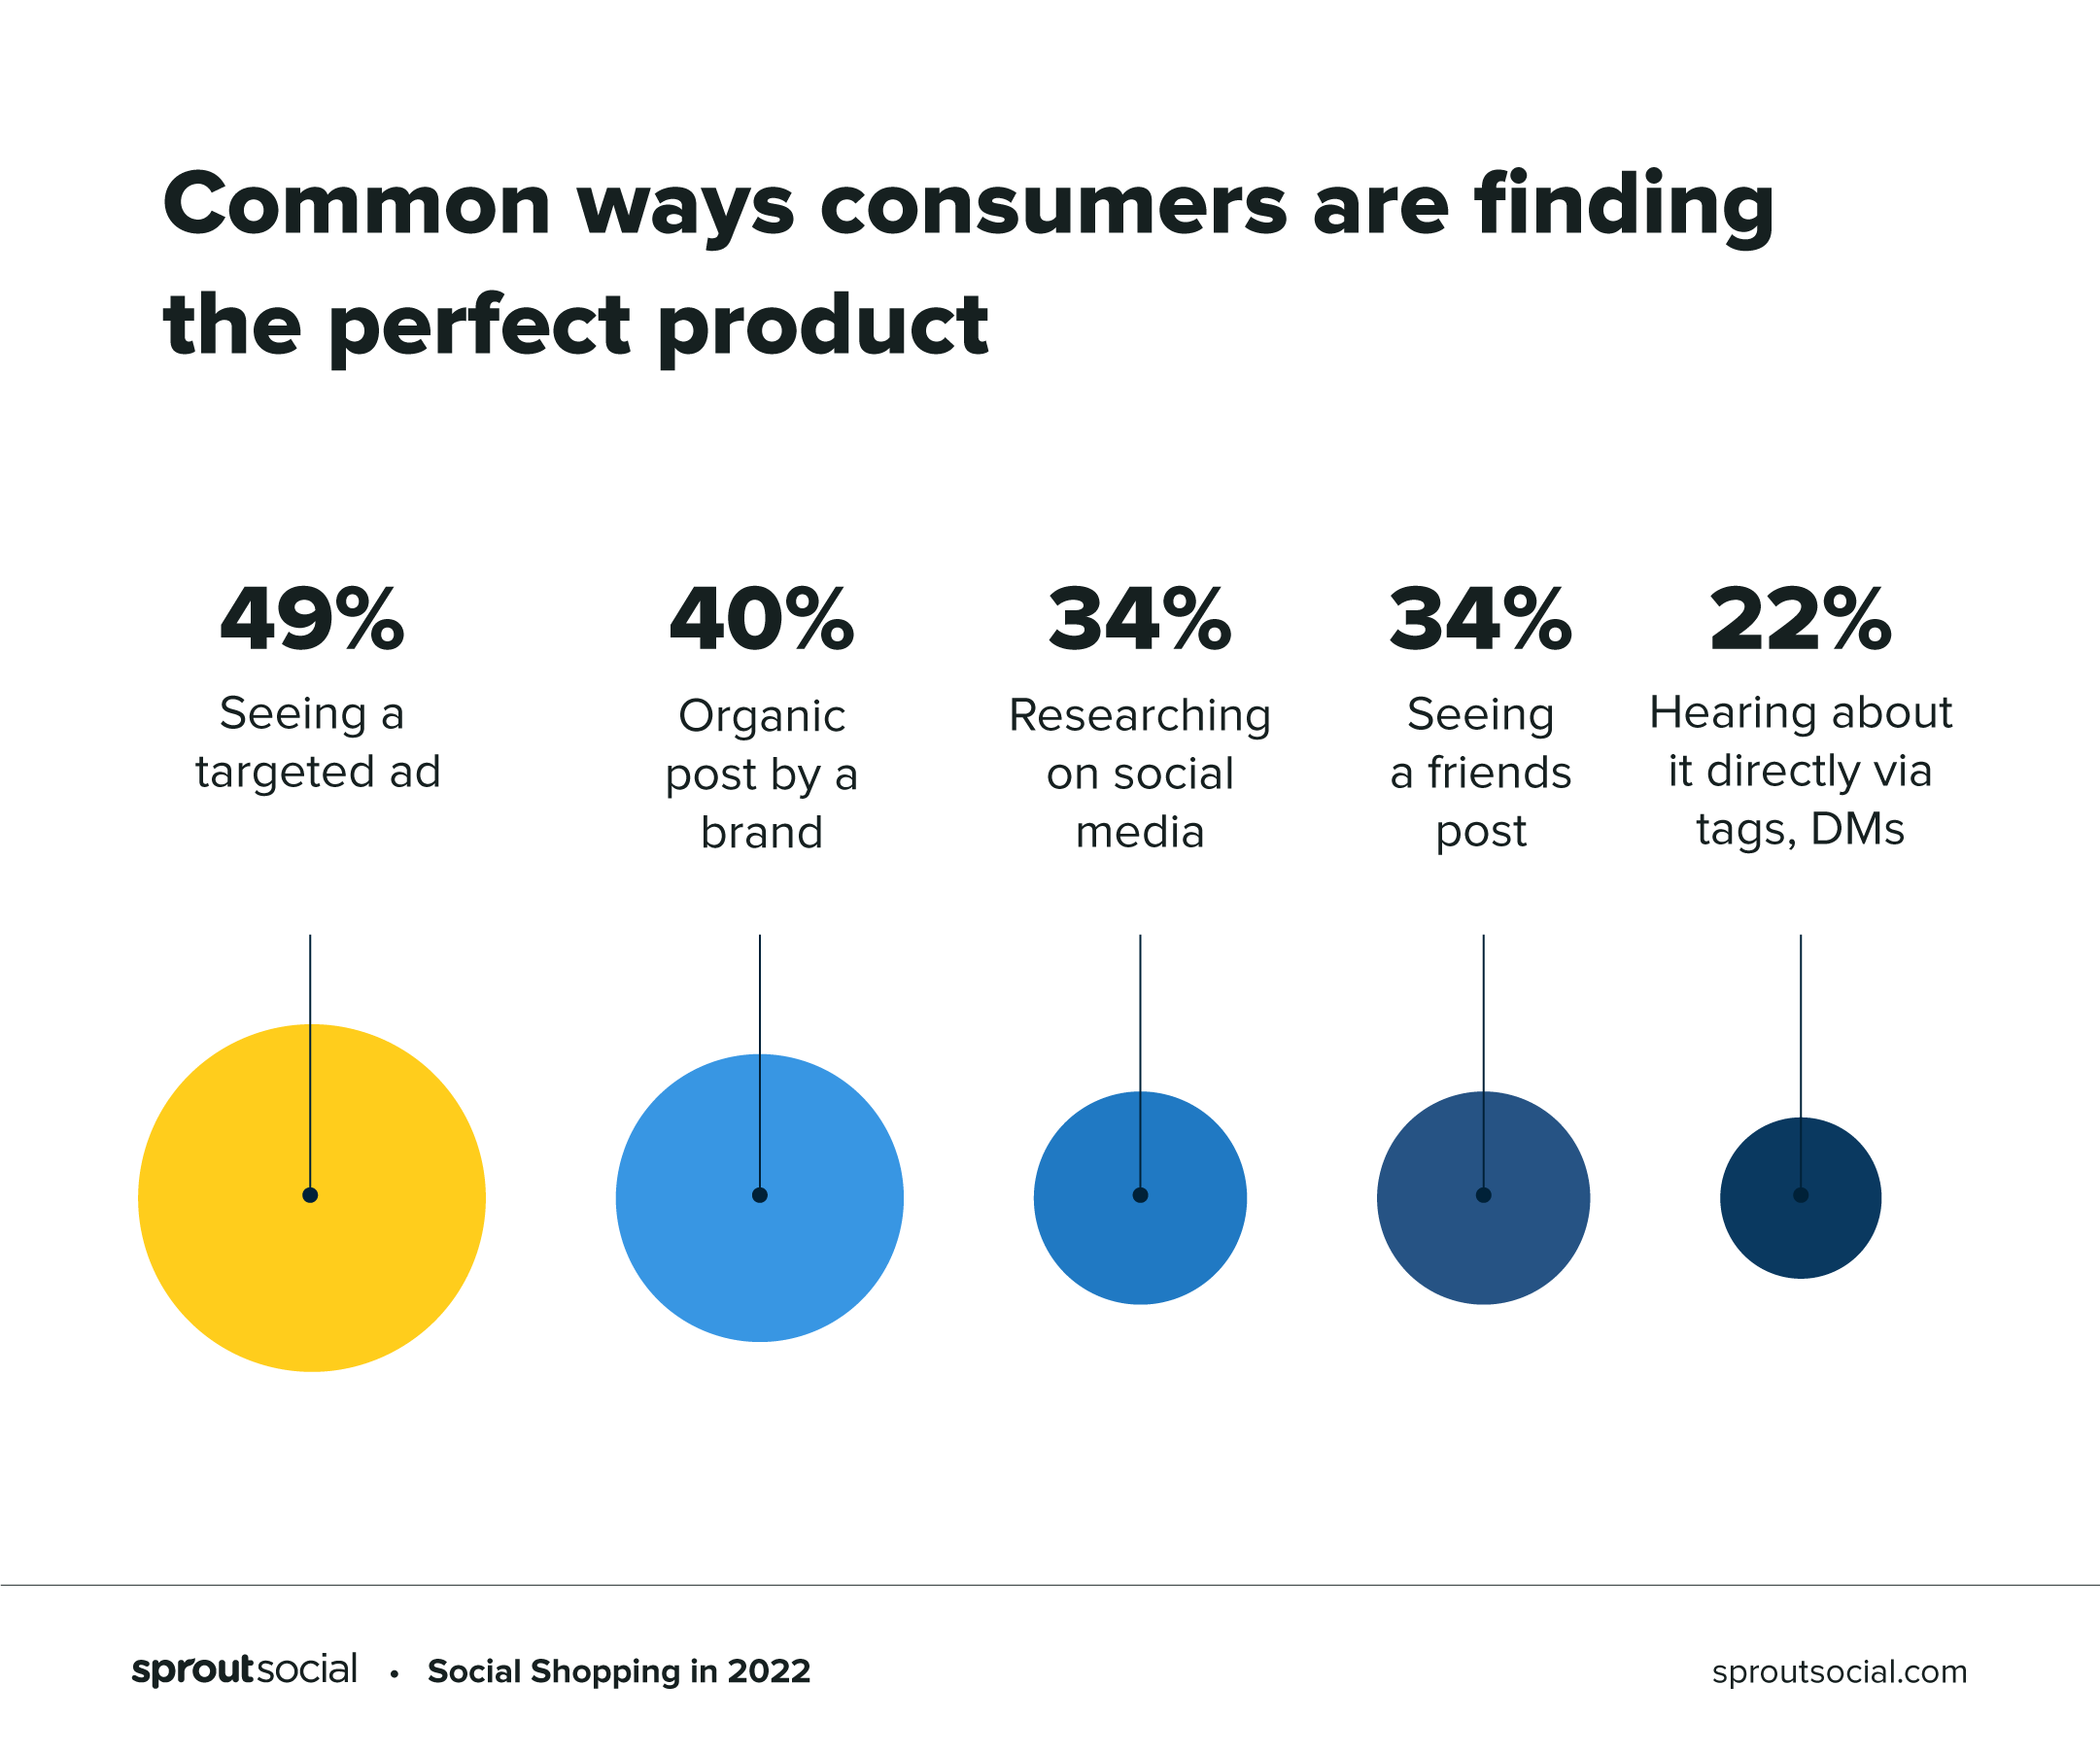 Chart showing common ways consumers find the perfect product to buy on social